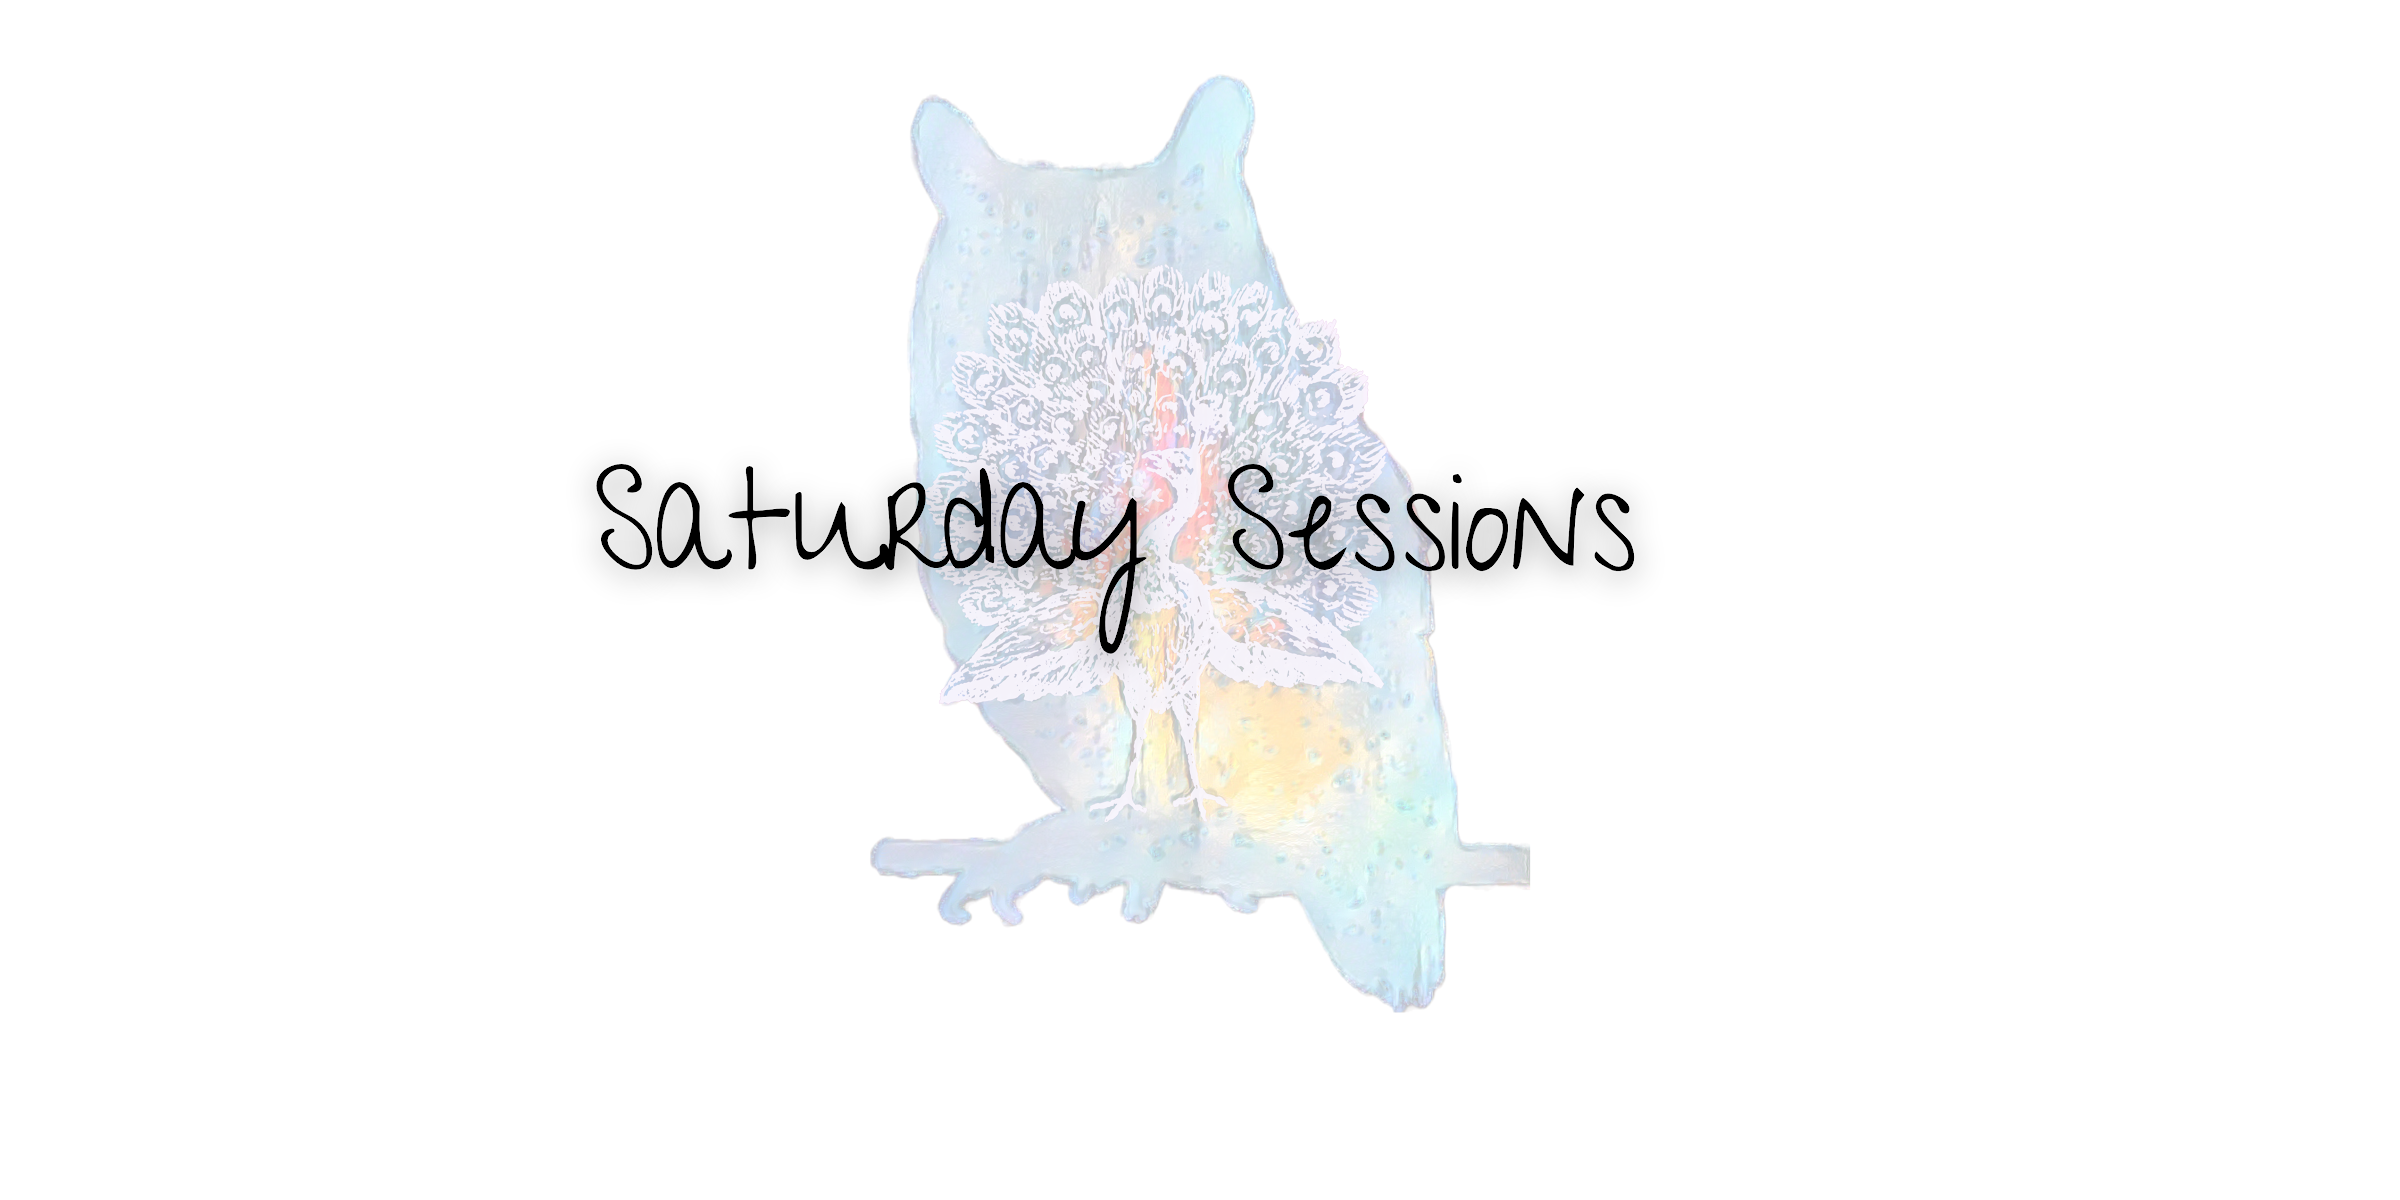 Saturday Sessions: The Blessing in Disguise: How My Brain Injury Strengthened My Spirituality